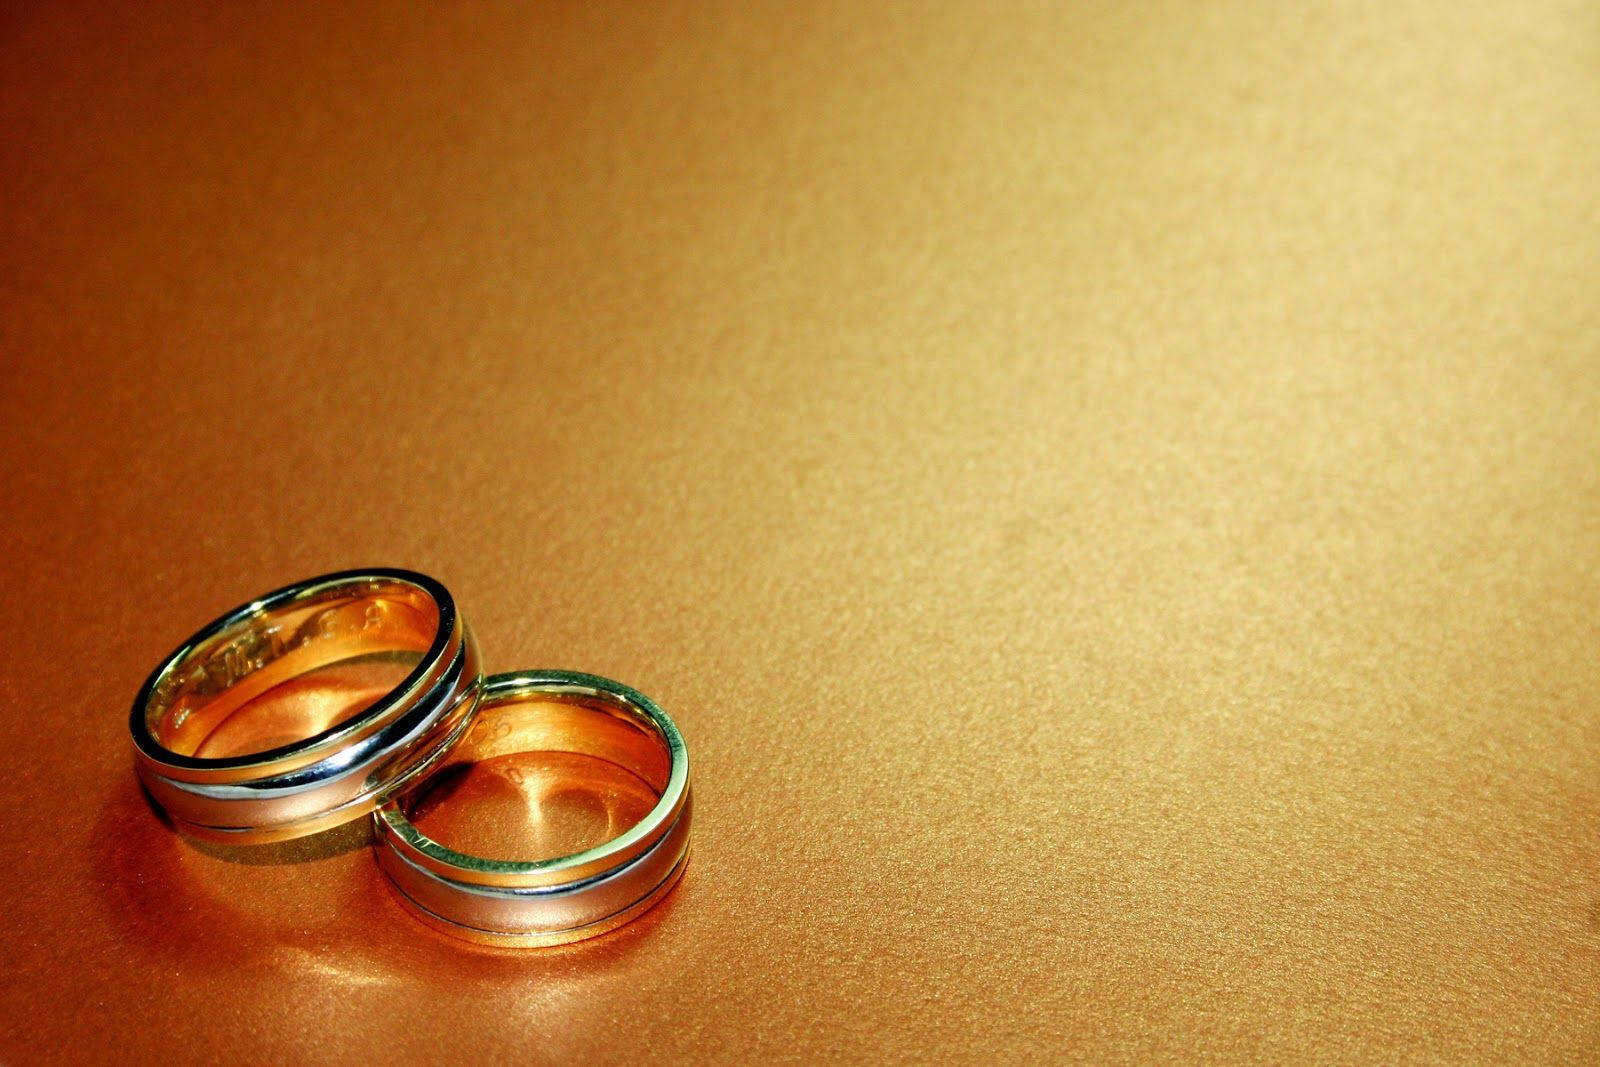 Two Gold Wedding Rings Background